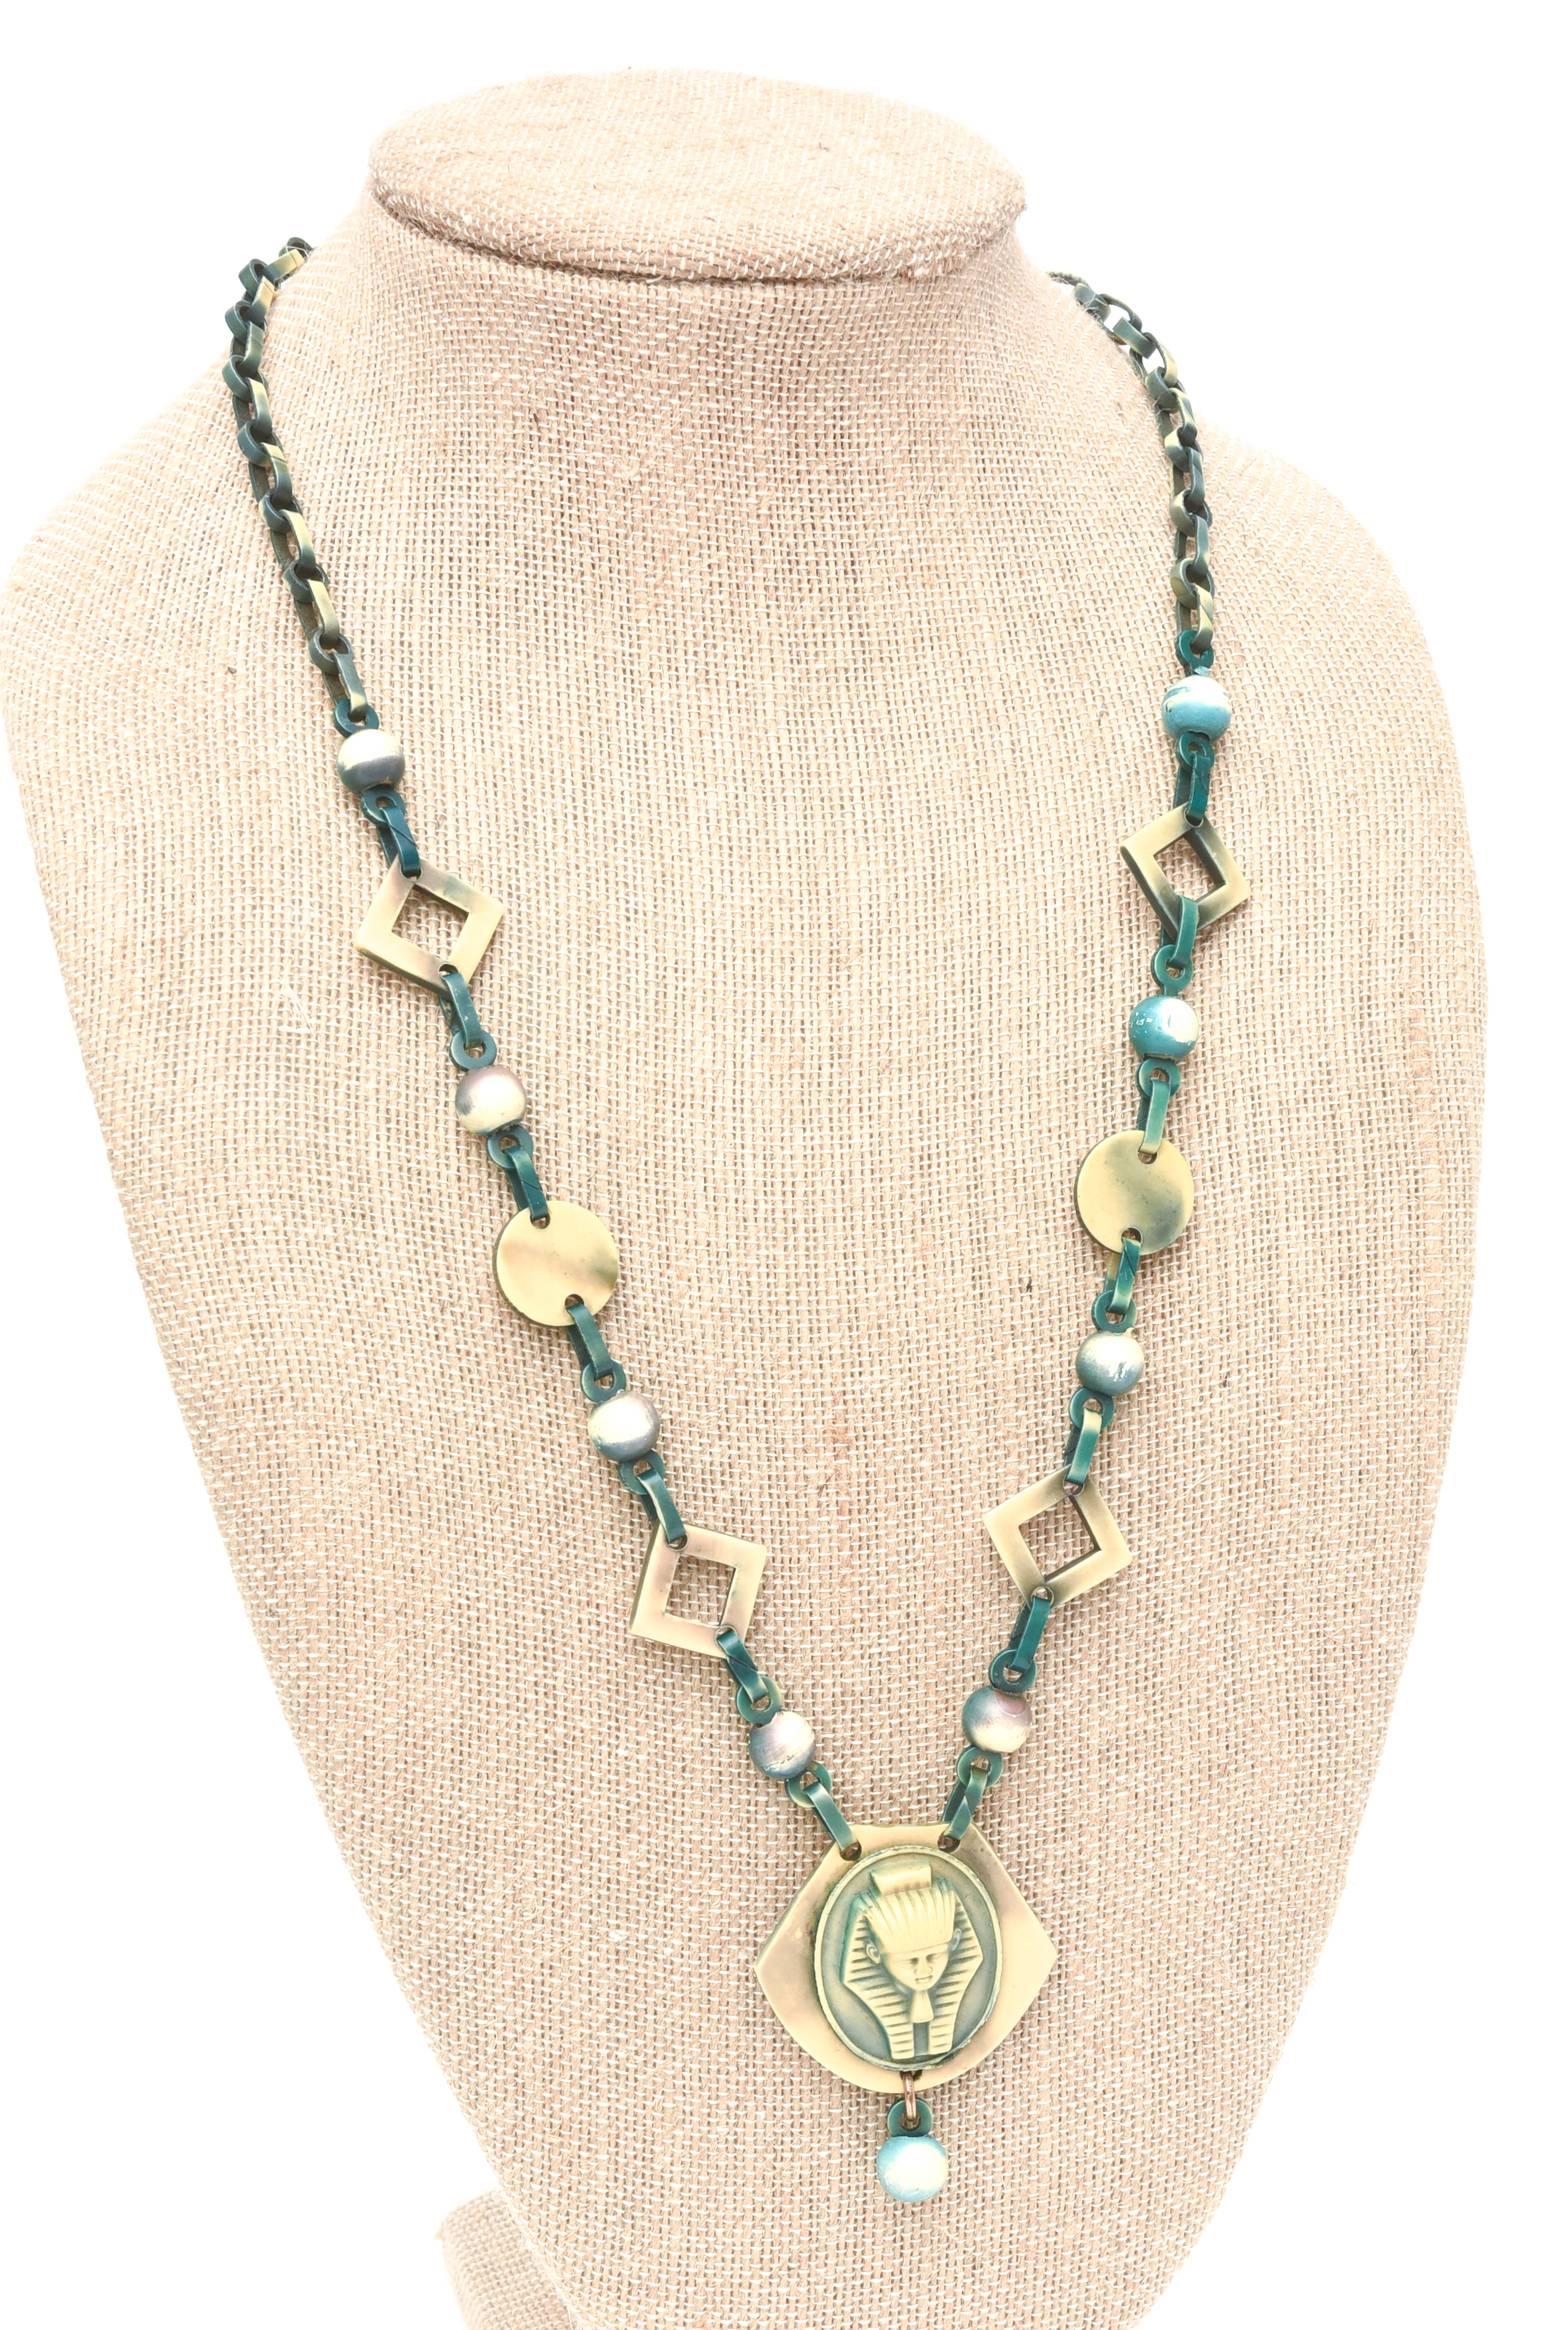 Egyptian Revival Vintage Teal Turquoise Green and Tan Celluloid Necklace  For Sale 4